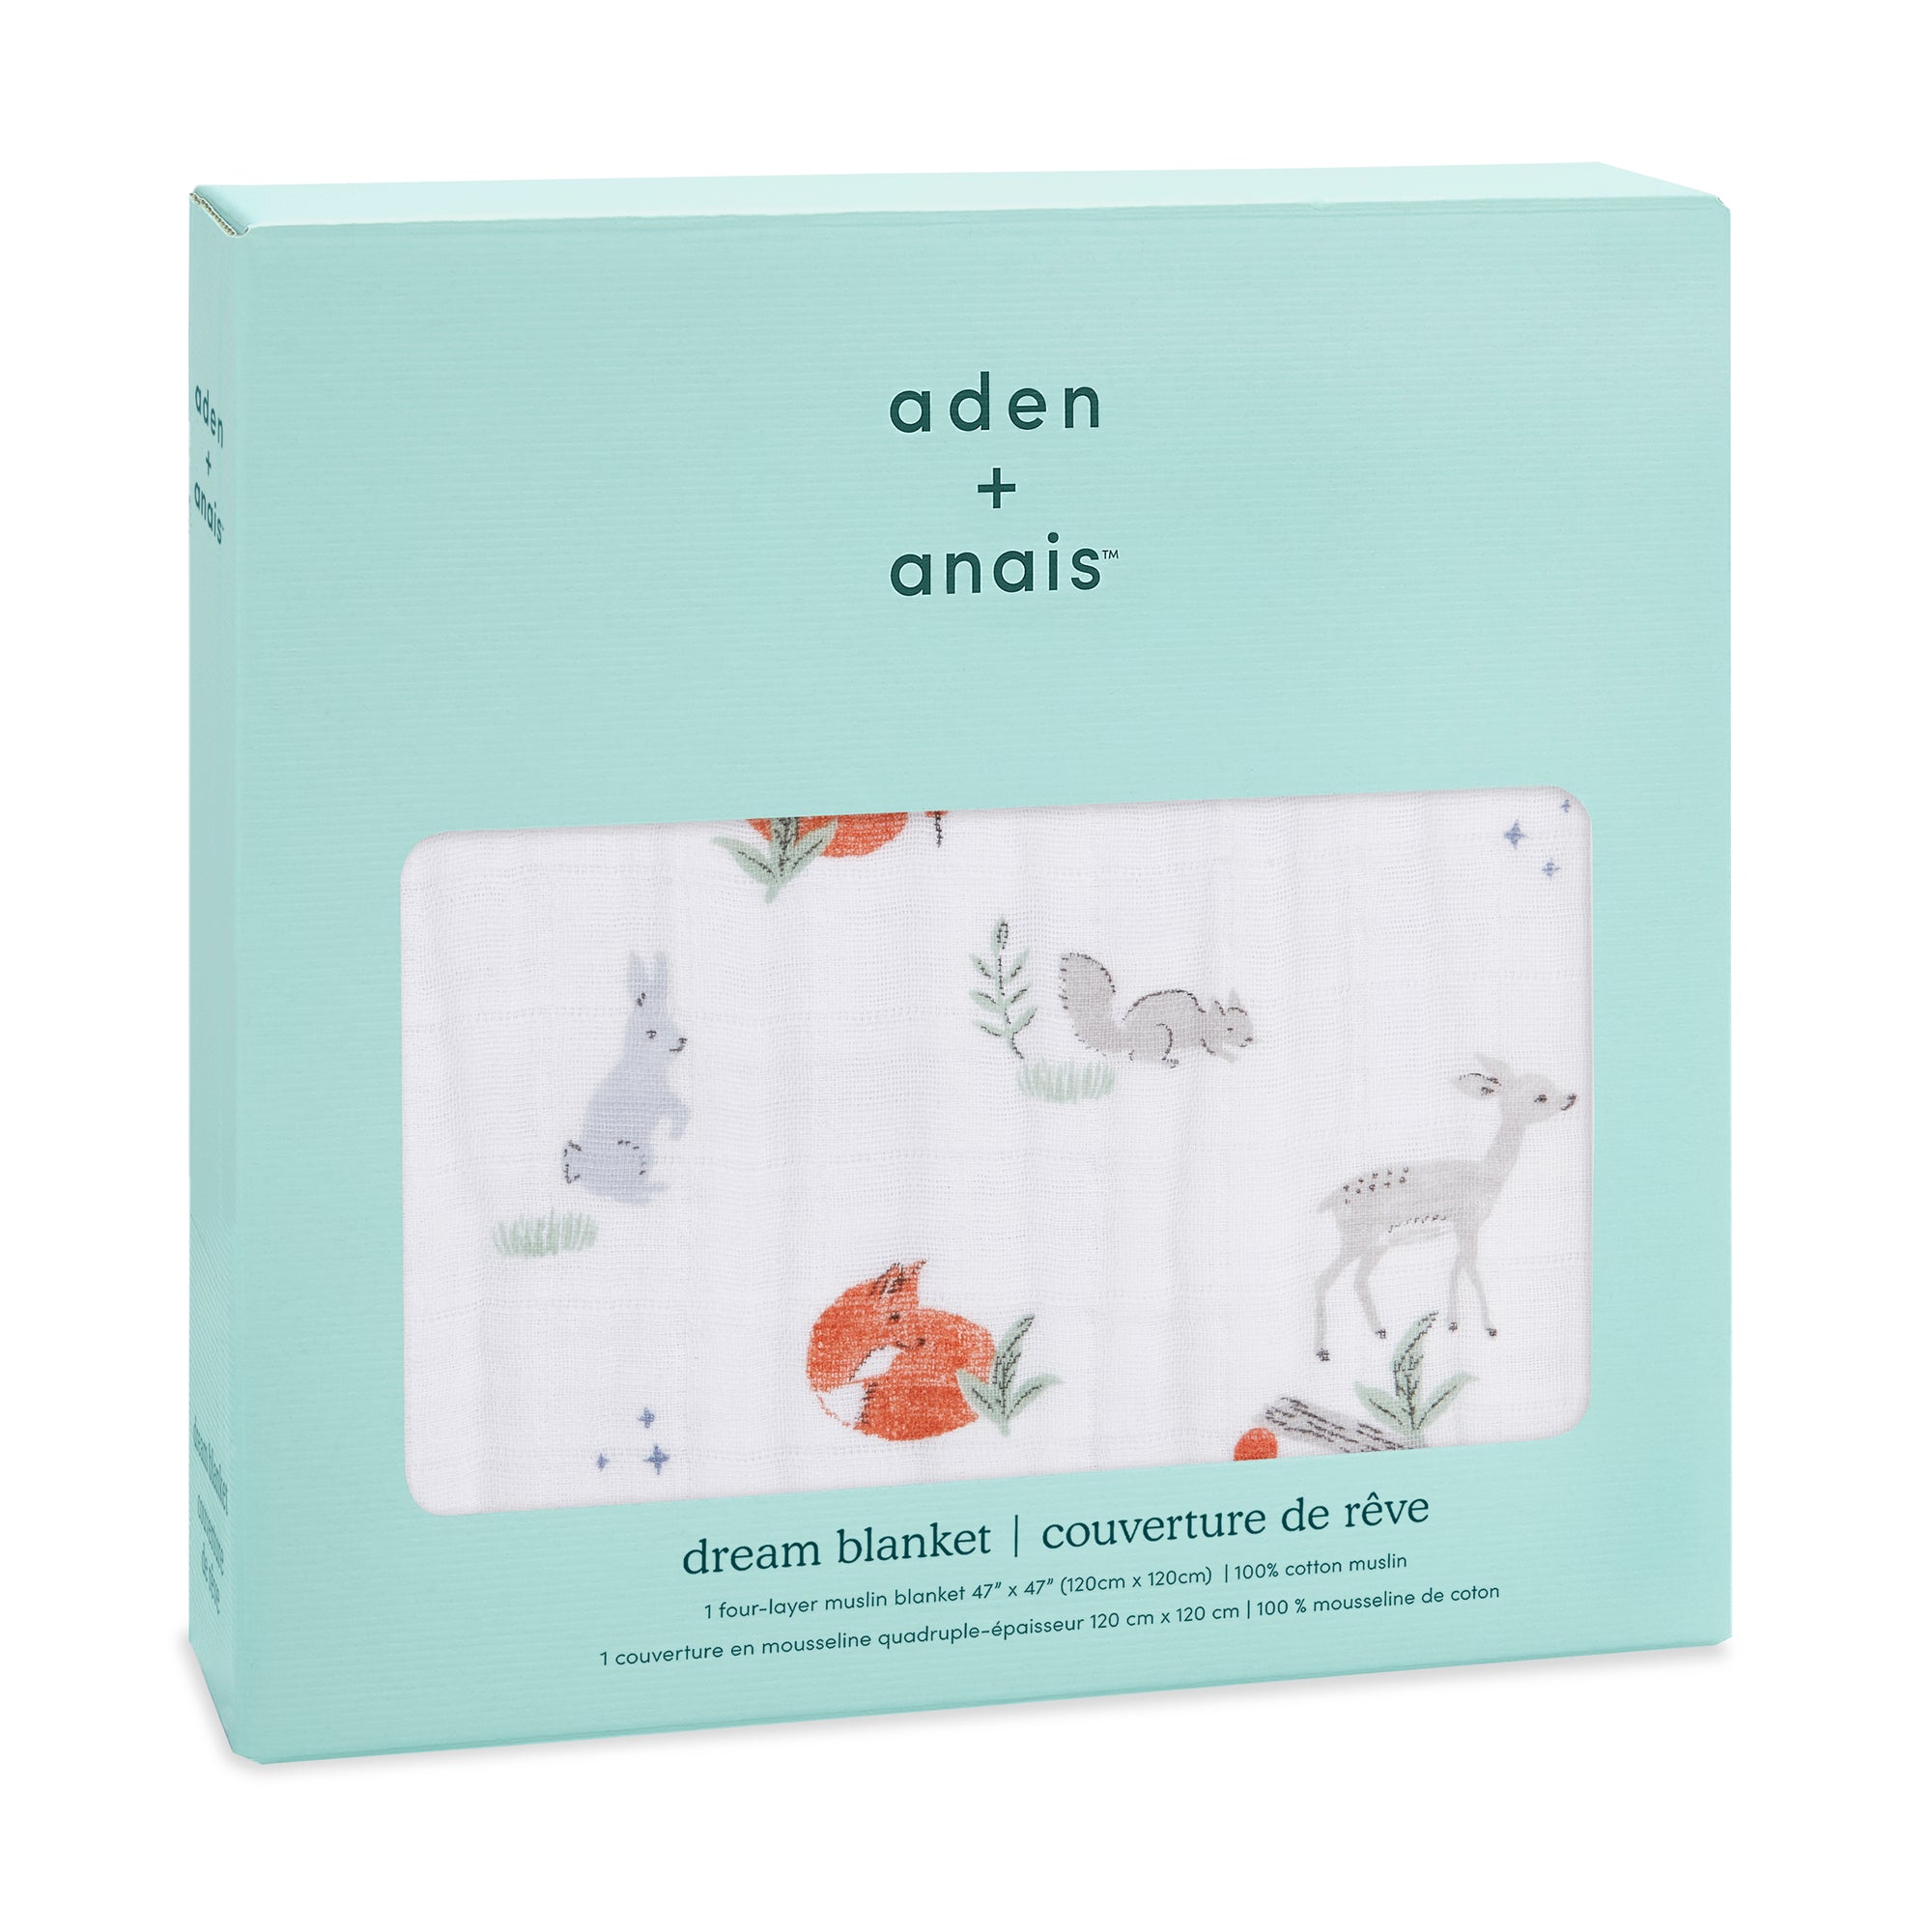 aden + anais naturally - forest classic dream blanket